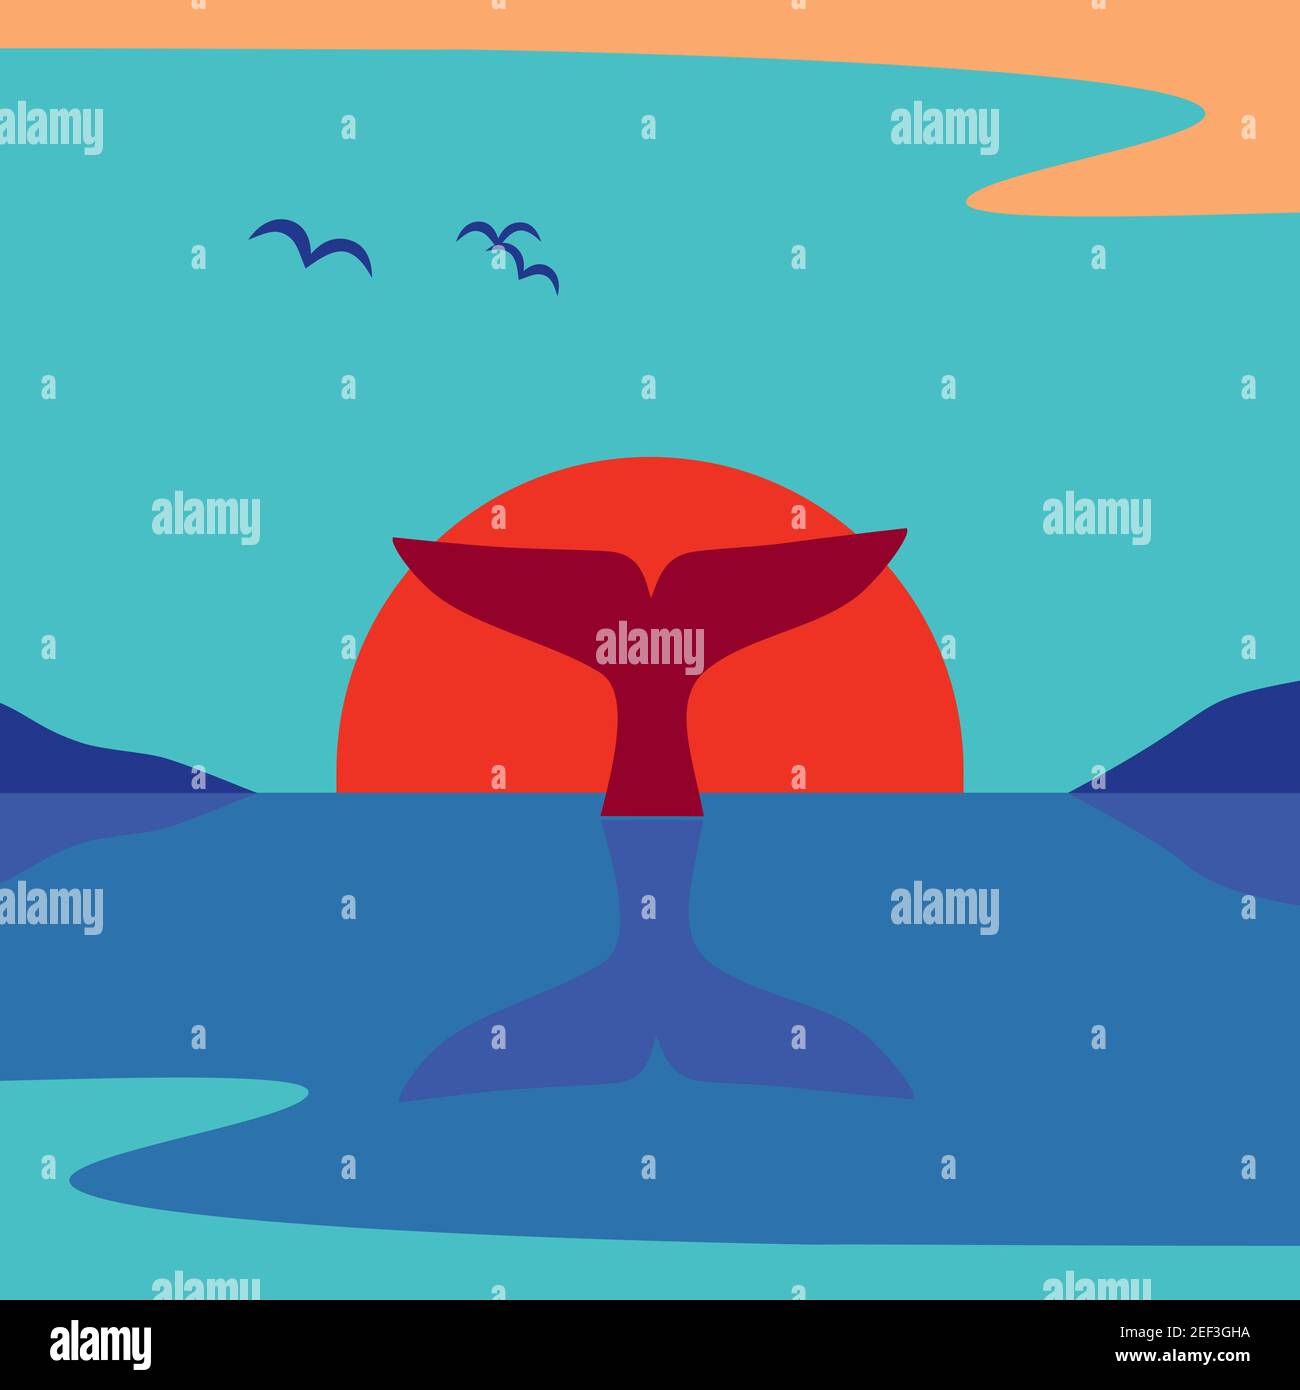 Whale Tail at Ocean Sunrise minimalistisches flaches Vektor-Poster Stock Vektor